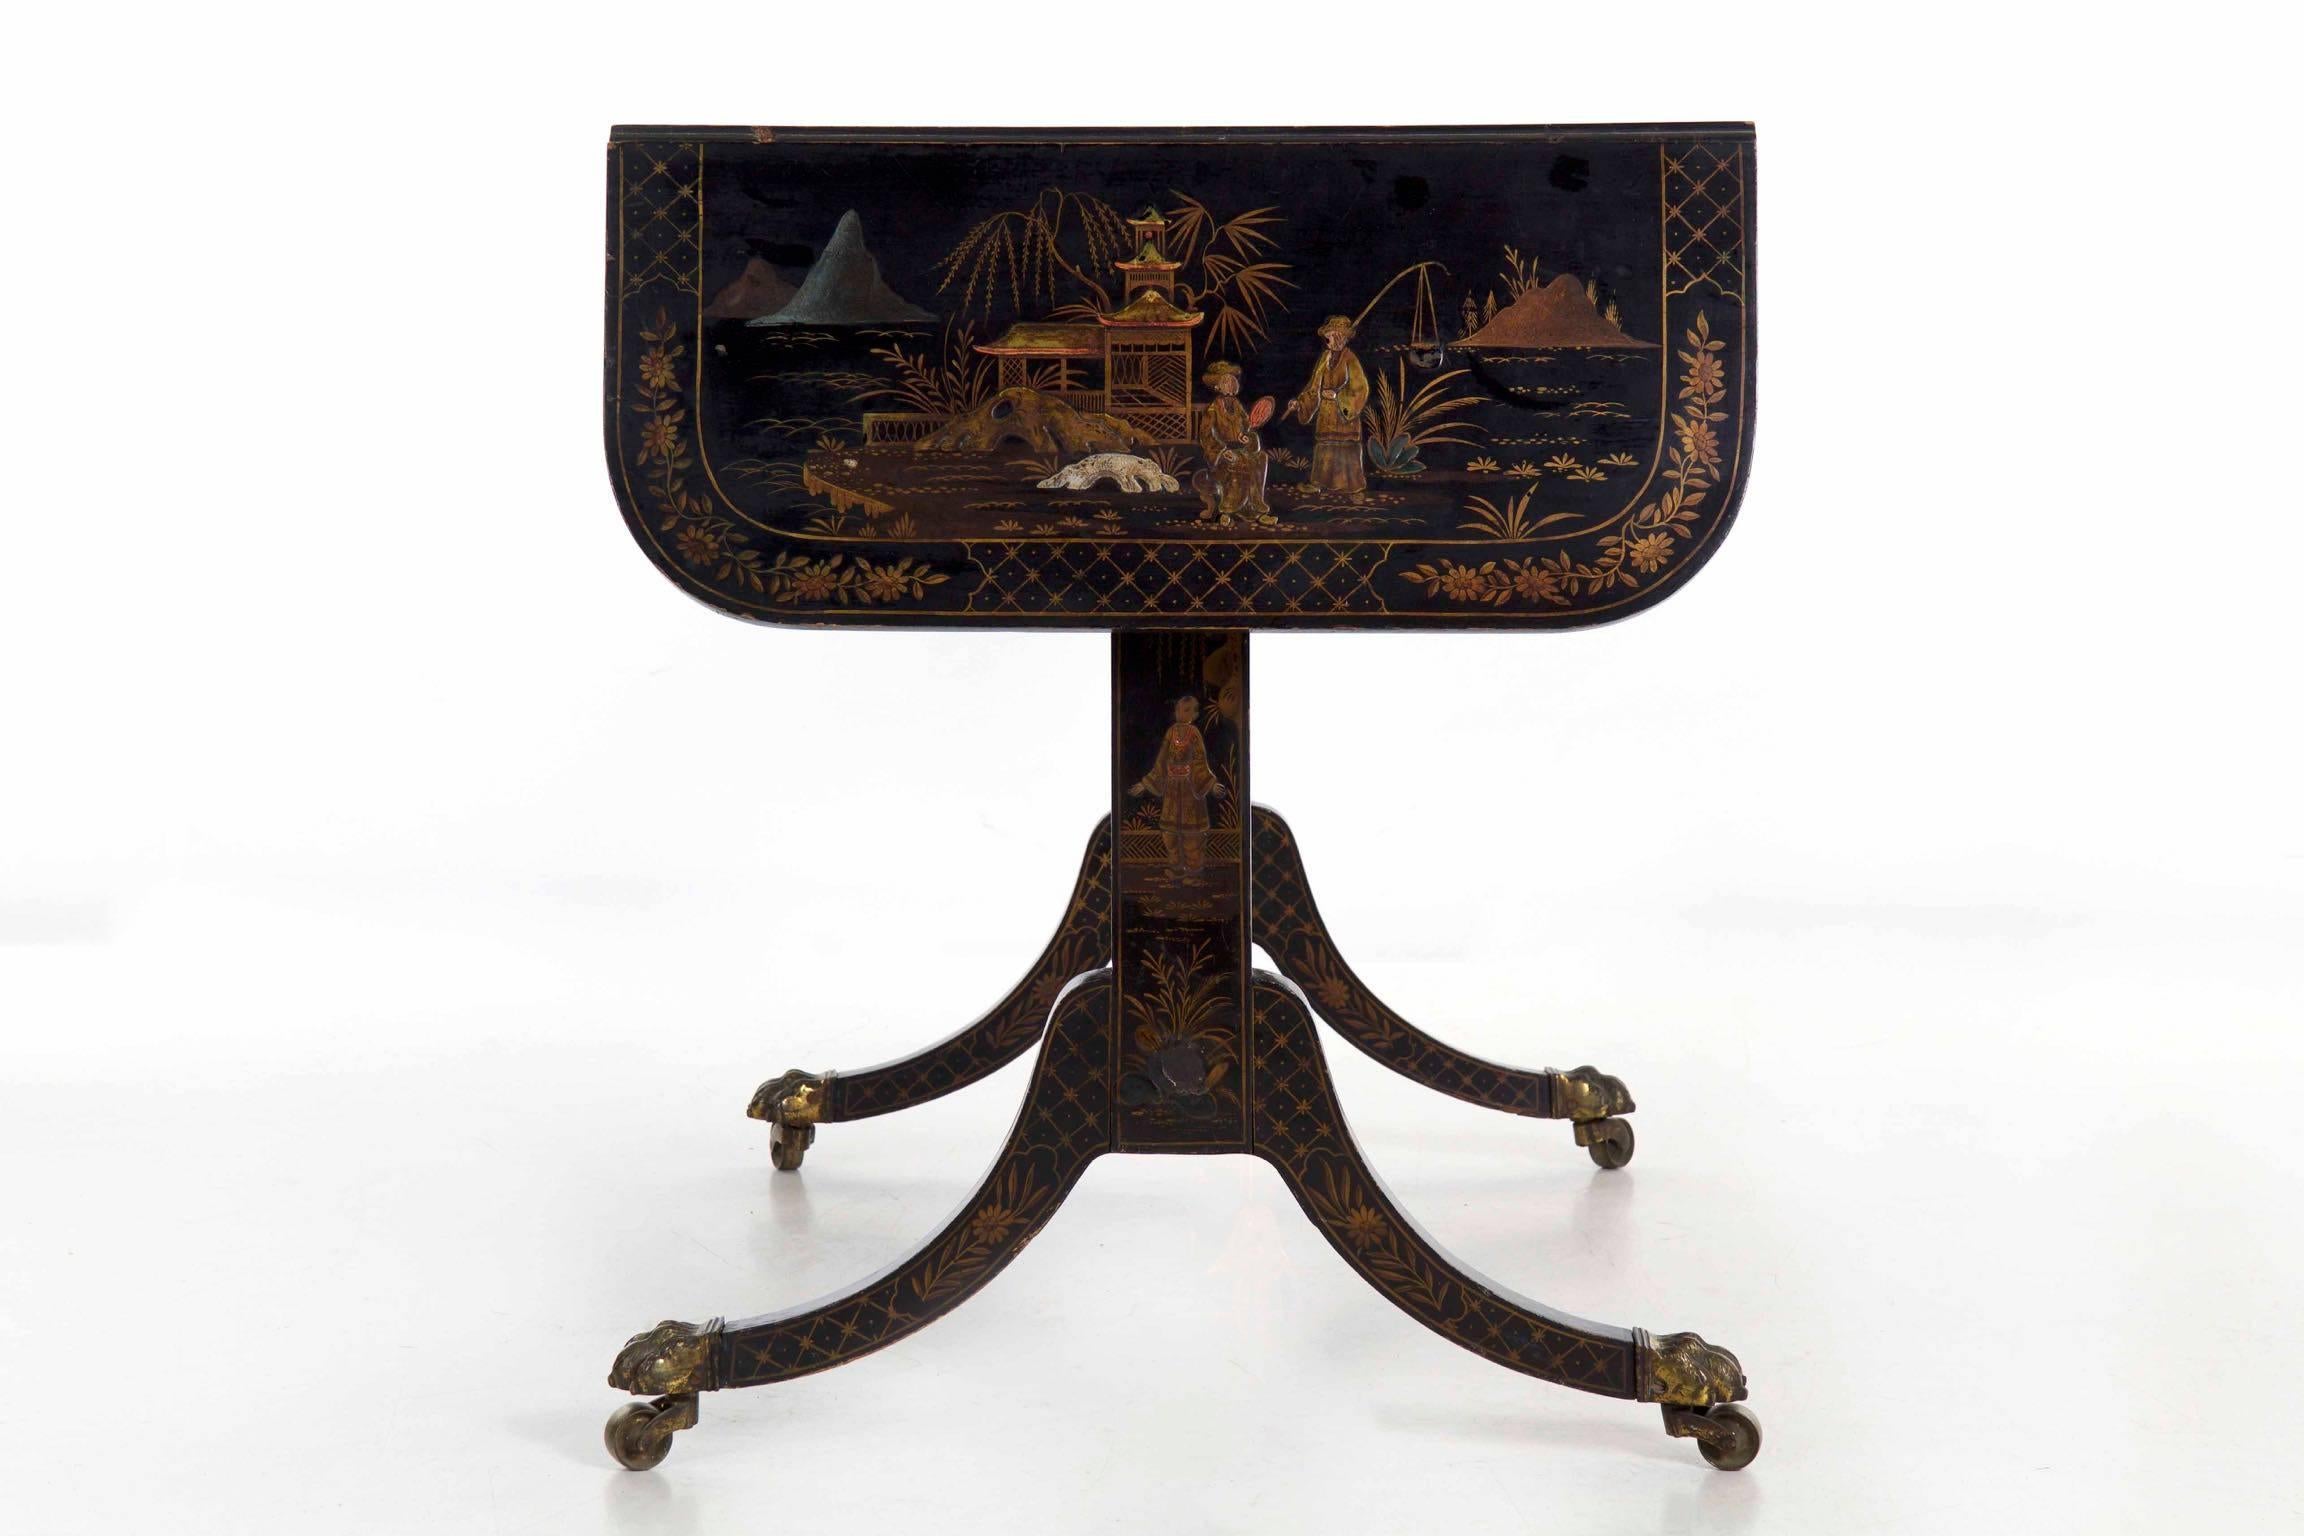 19th Century English Regency Chinoiserie Decorated Sofa Table 1